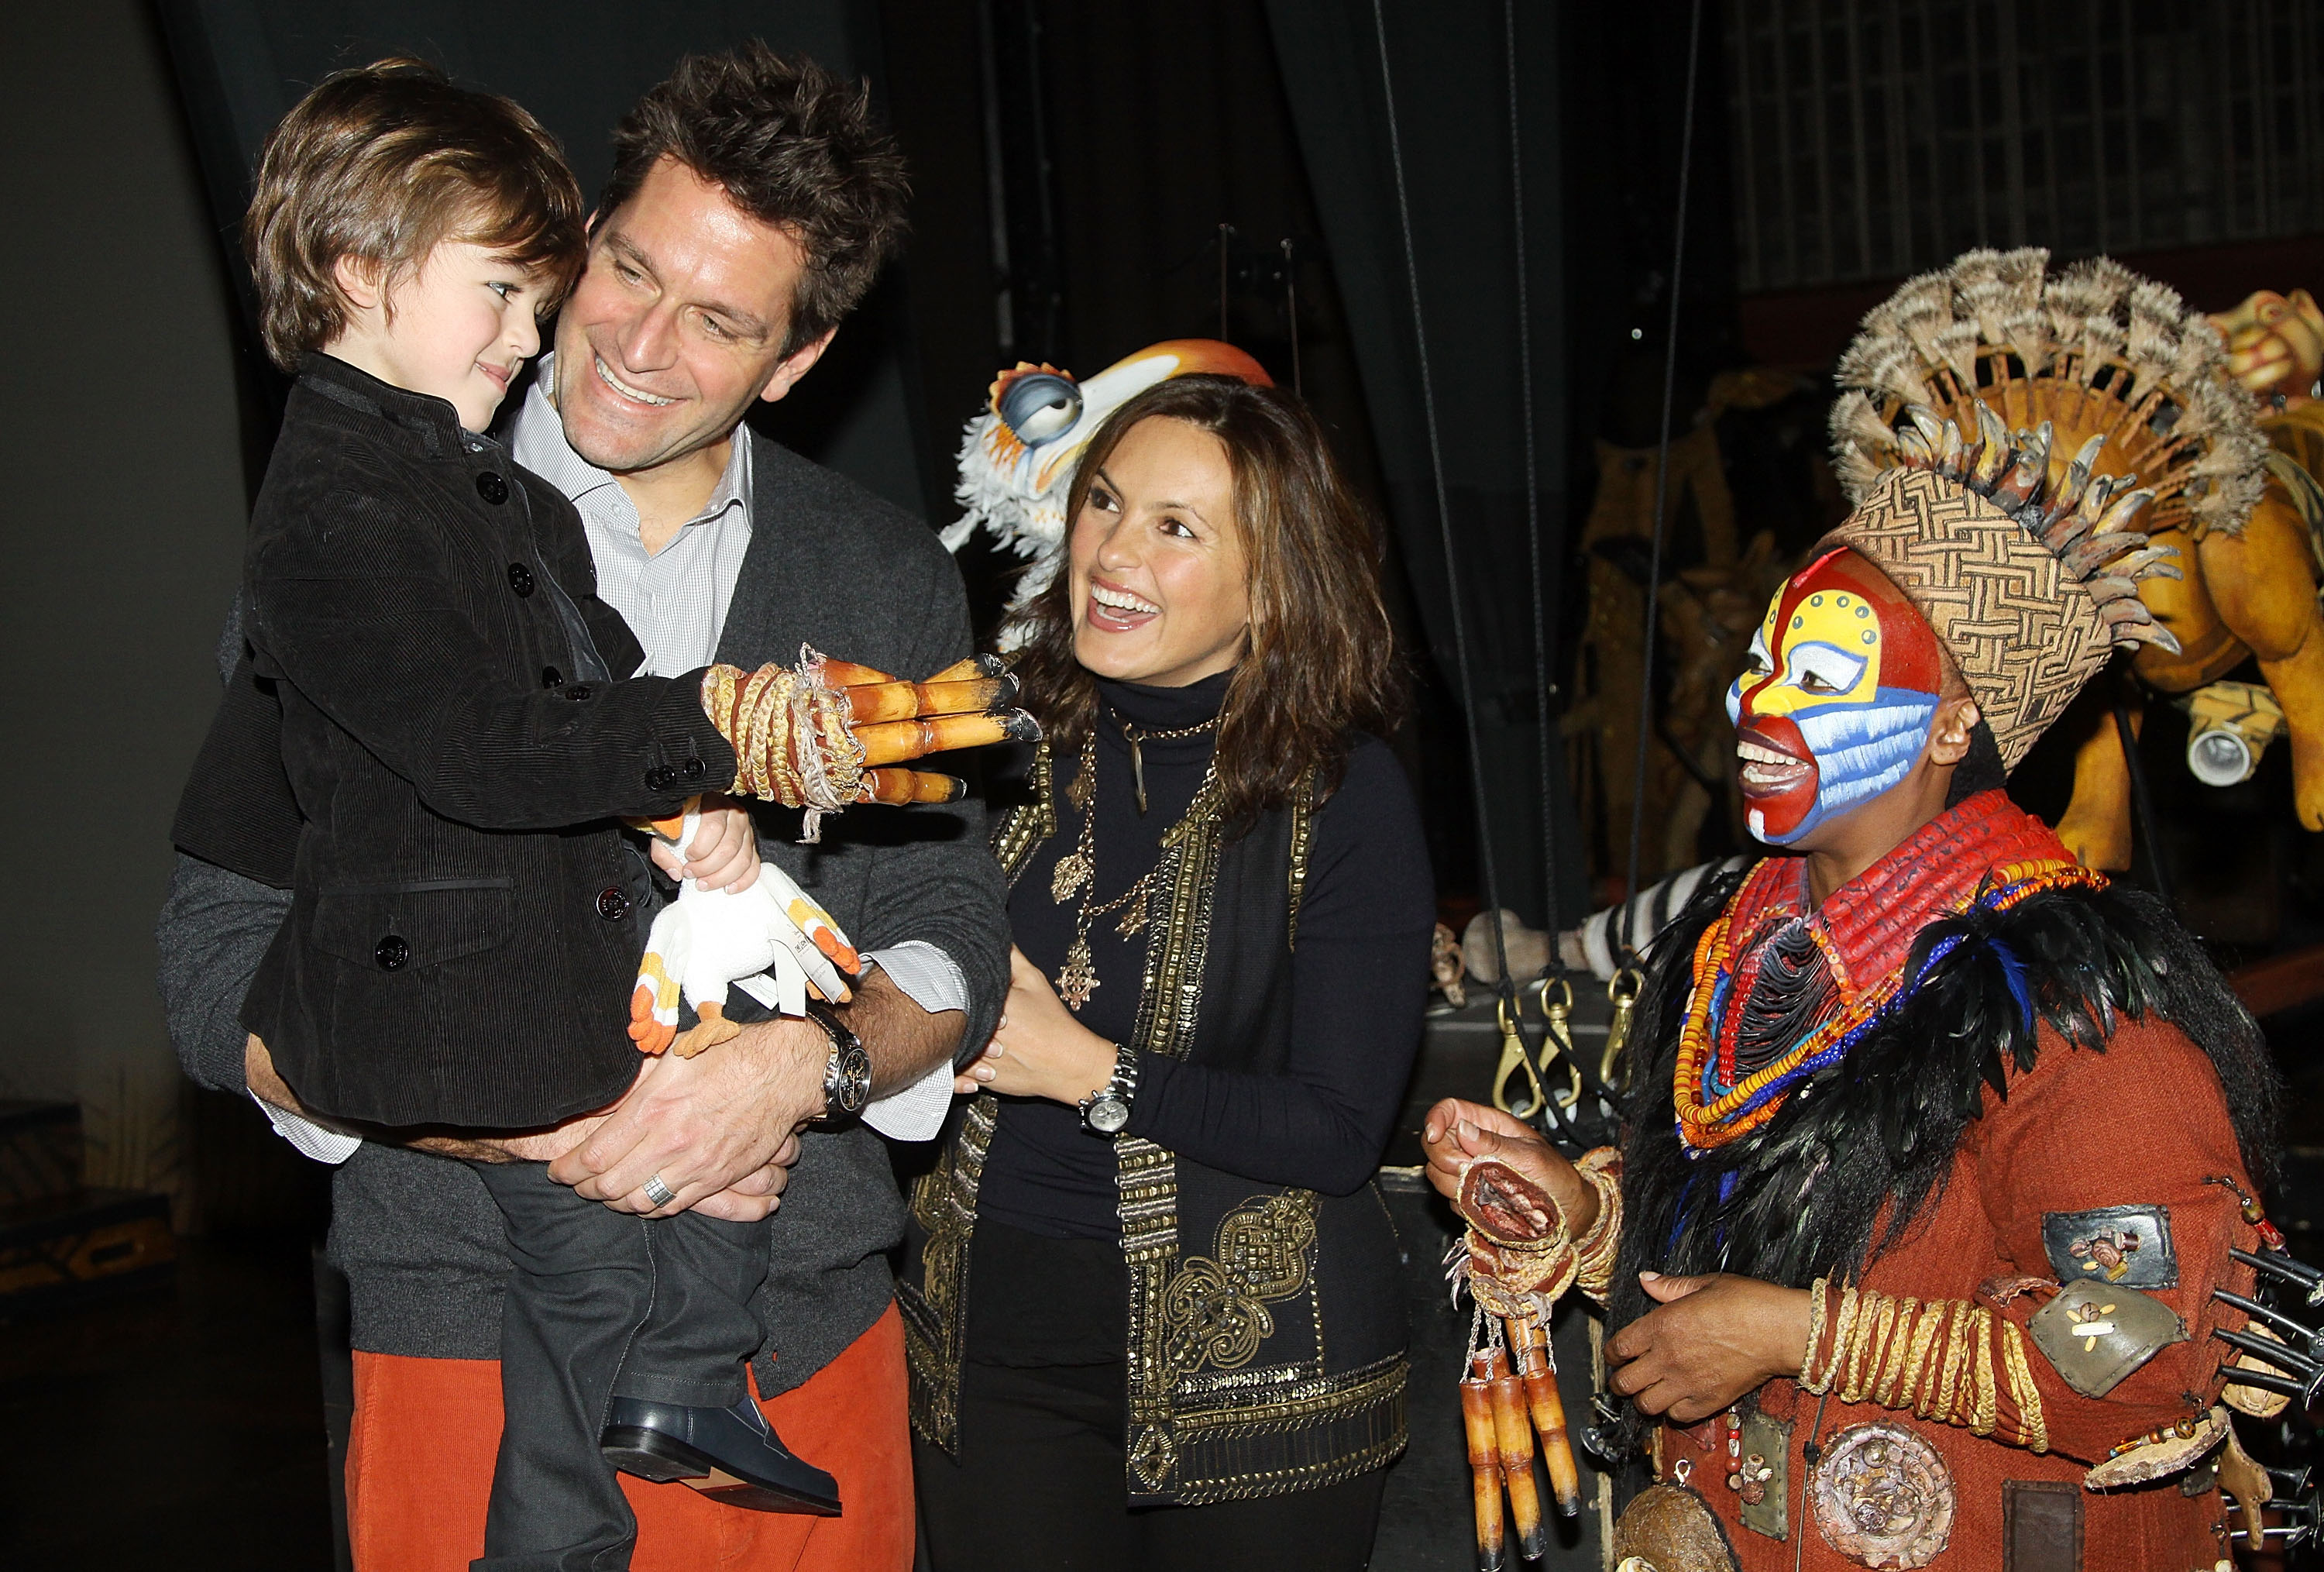 August, and Peter Hermann, Mariska Hargitay, and Tshidi Manye backstage at the Broadway musical production of "The Lion King" in New York City, 2010 | Source: Getty Images